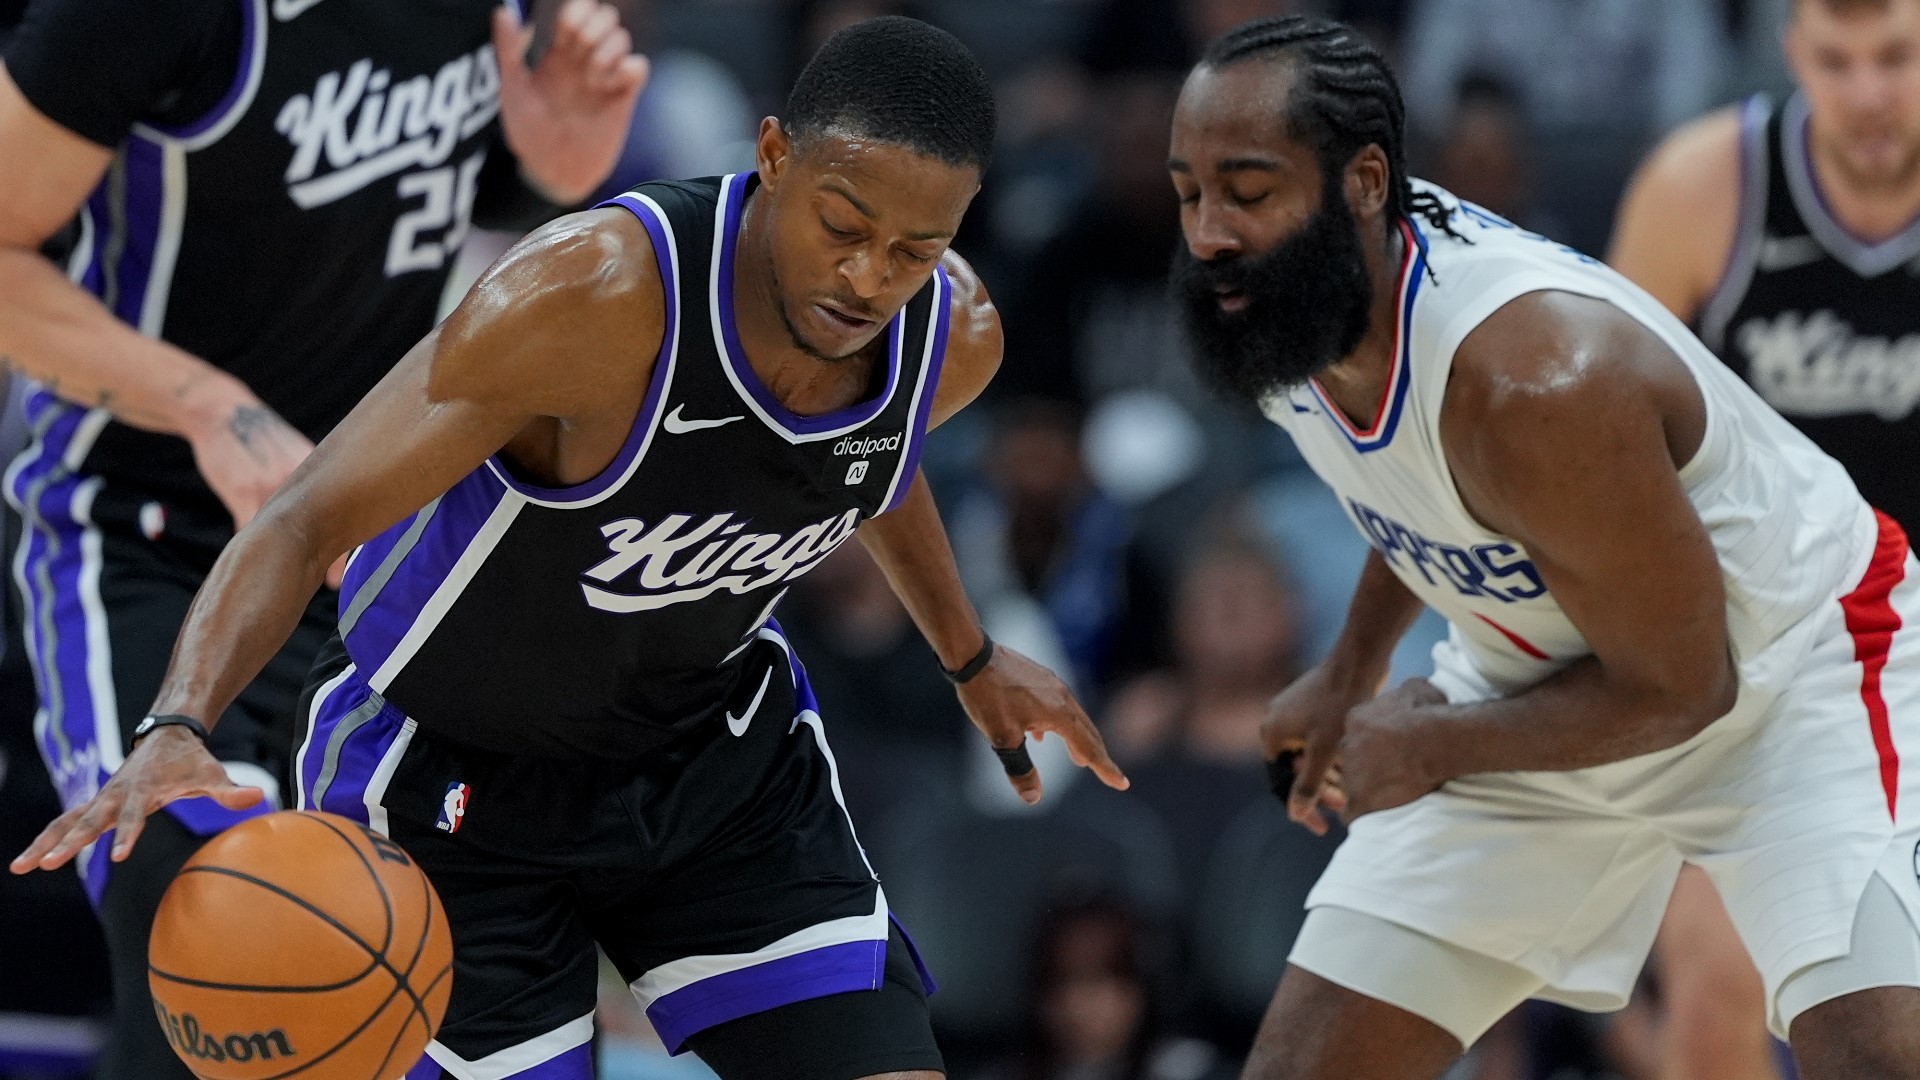 The Kings moved within one game of sixth-place New Orleans in the Western Conference as they seek to avoid the play-in tournament.